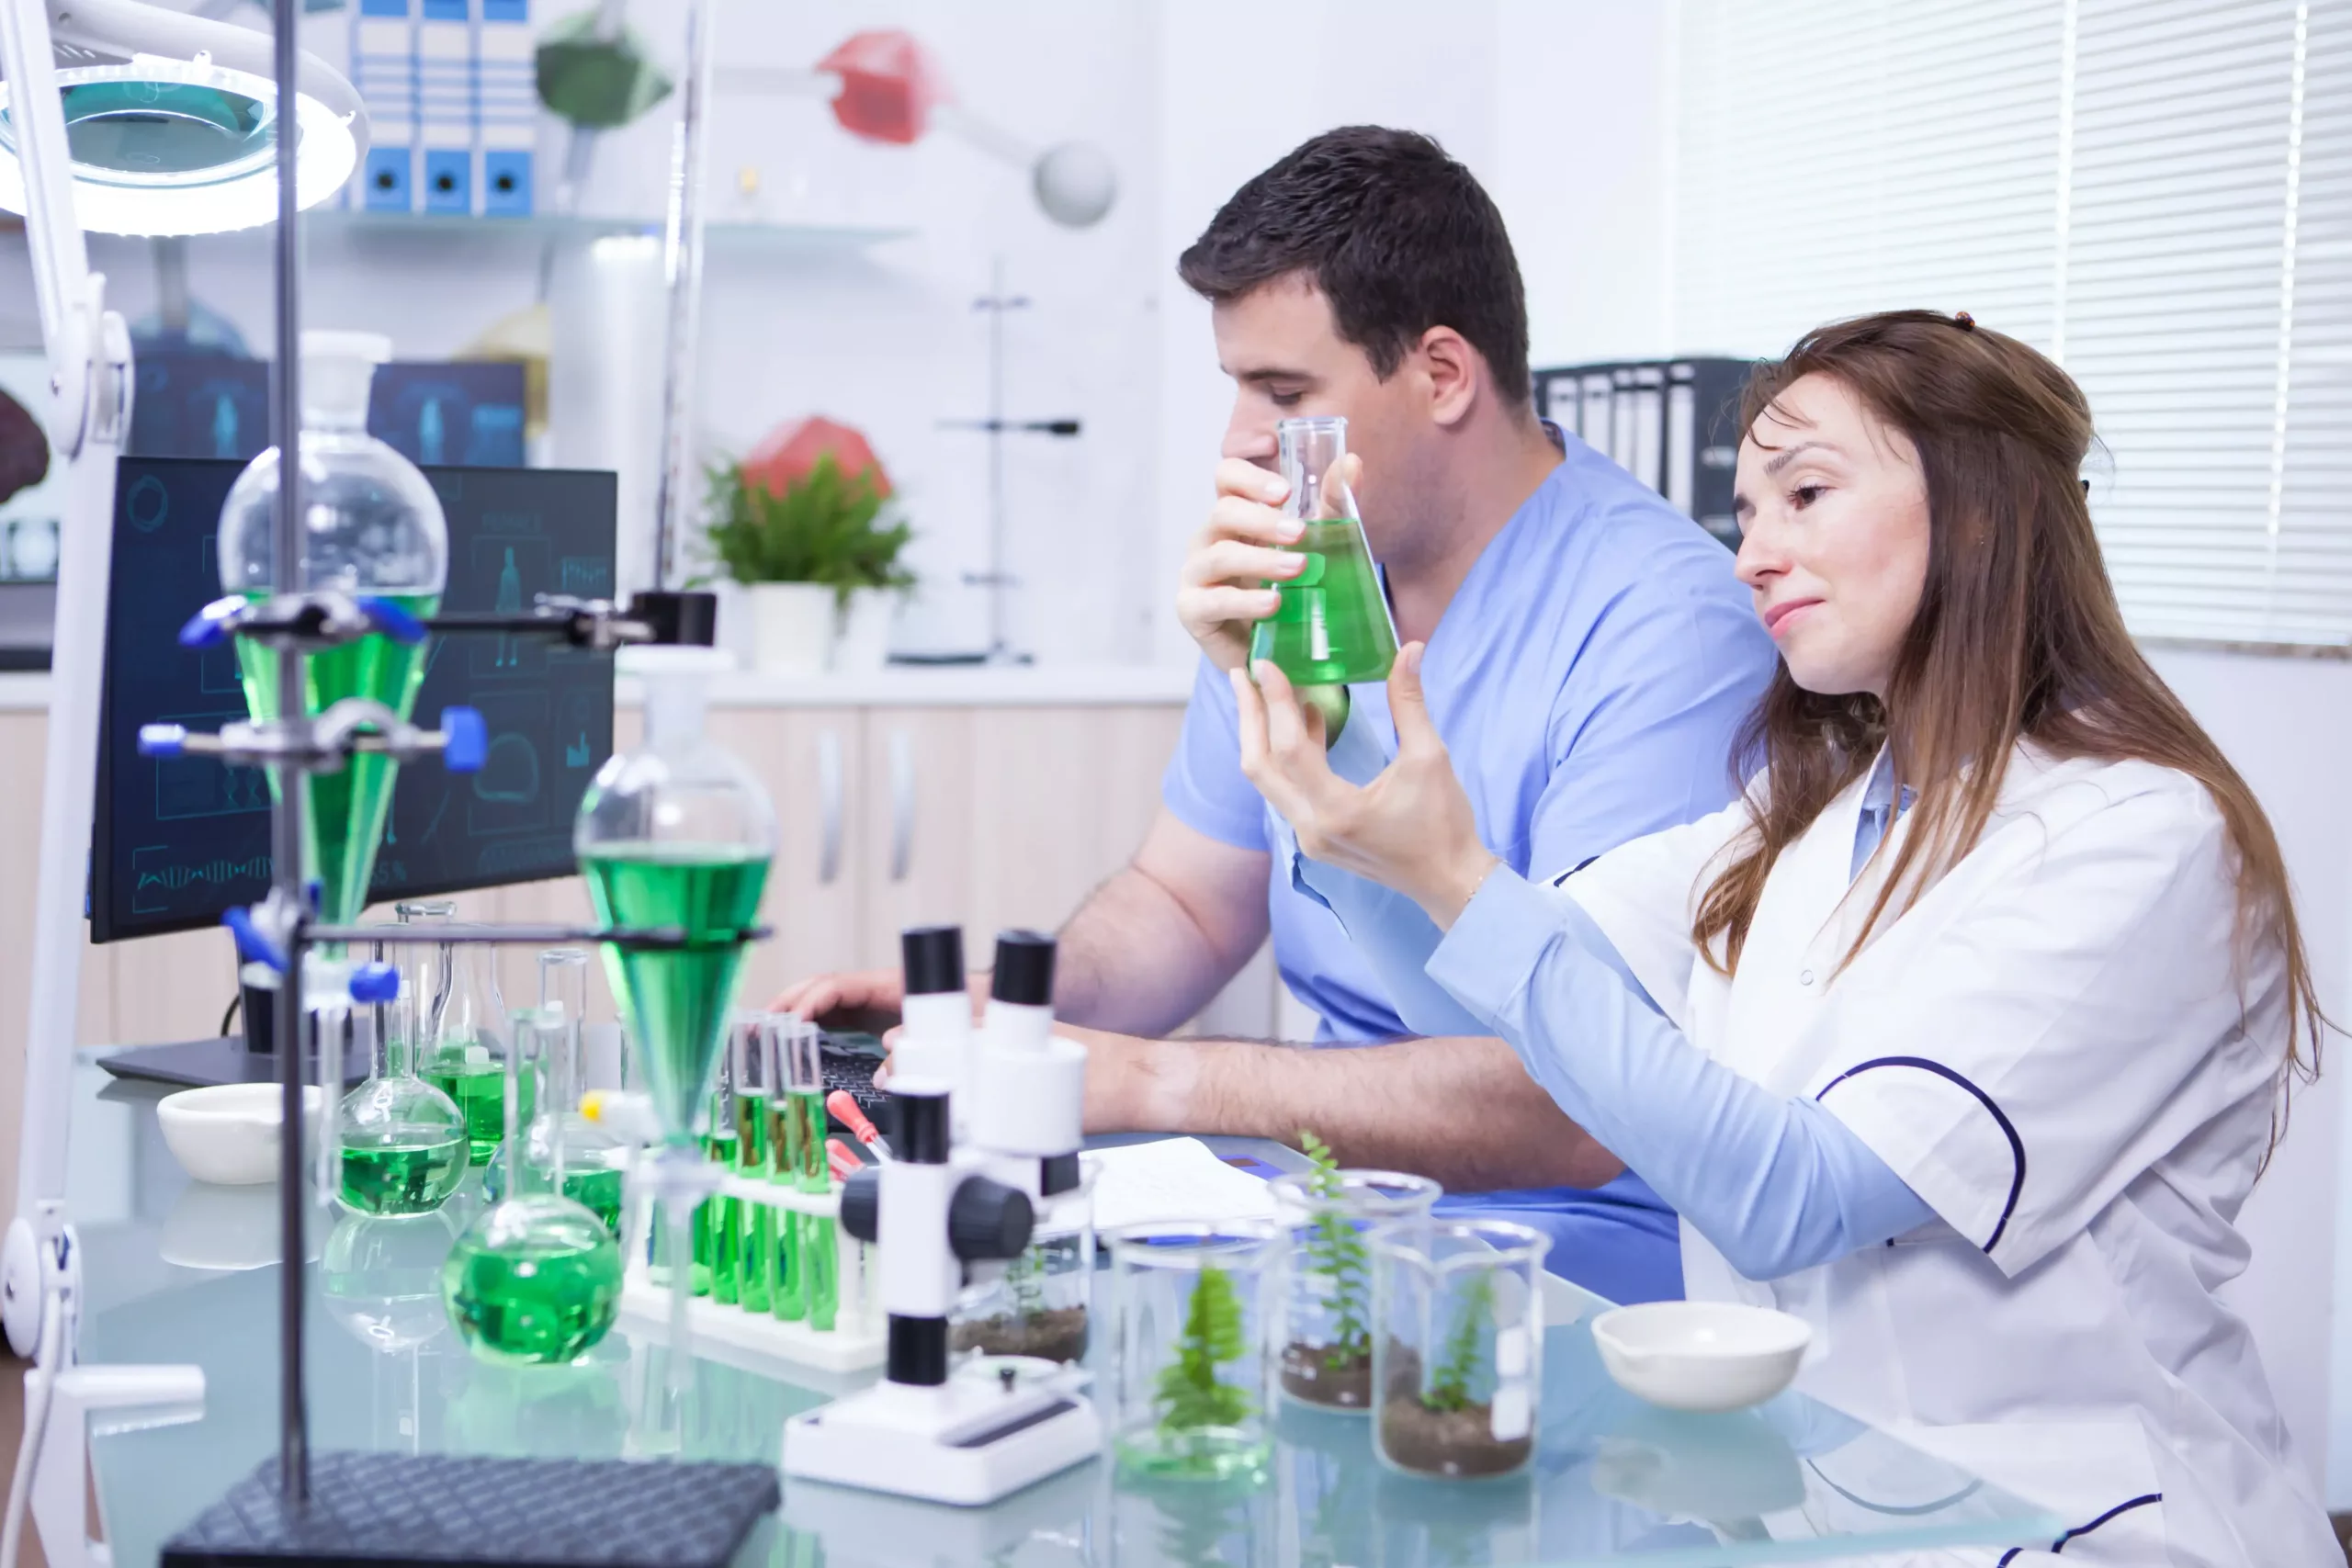 middle-age-woman-with-her-assistant-working-research-lab-microbiology-test-tubes